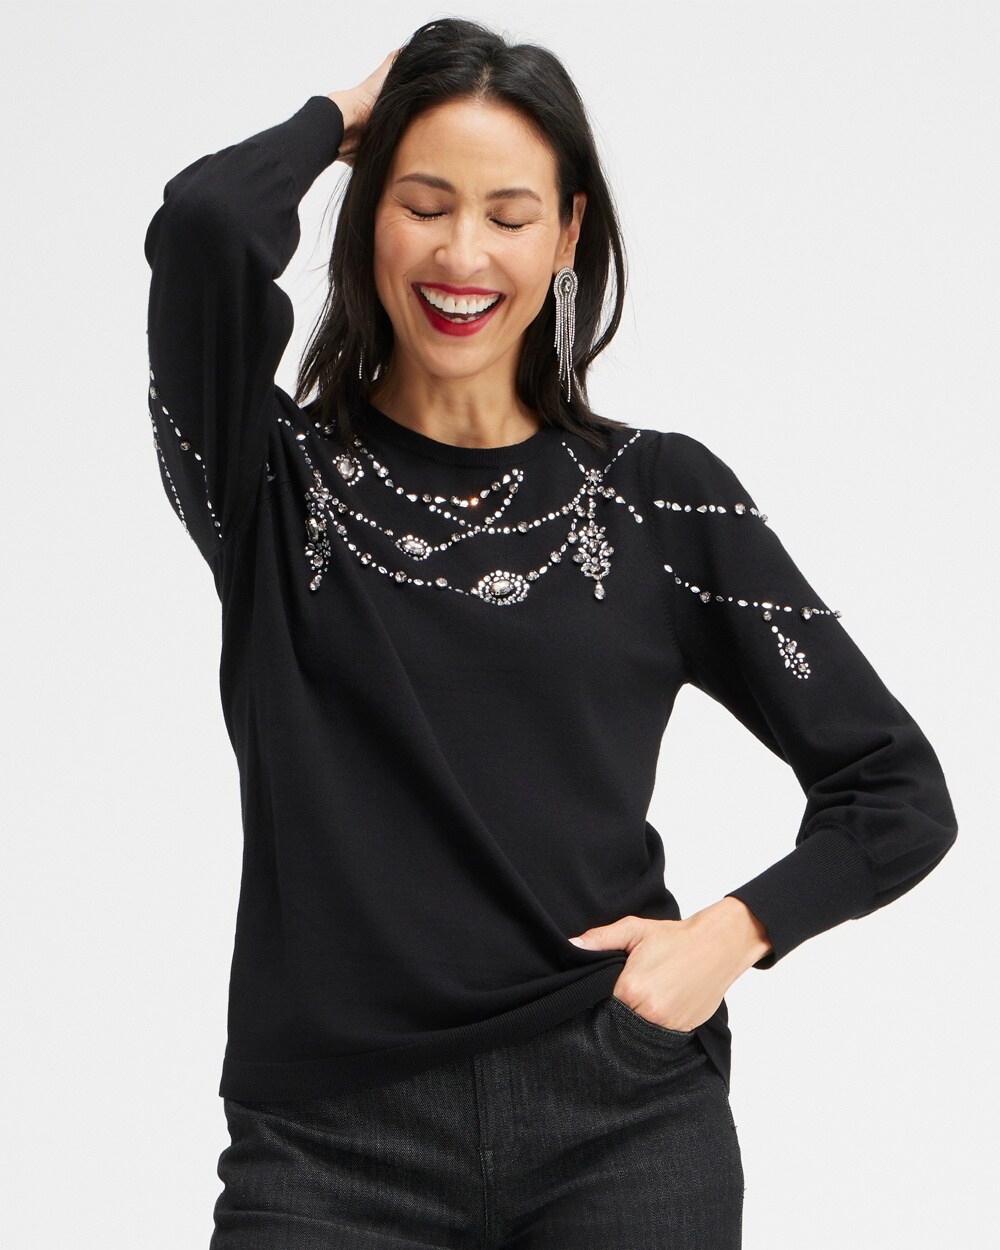 Crystal Chandelier Pullover Sweater